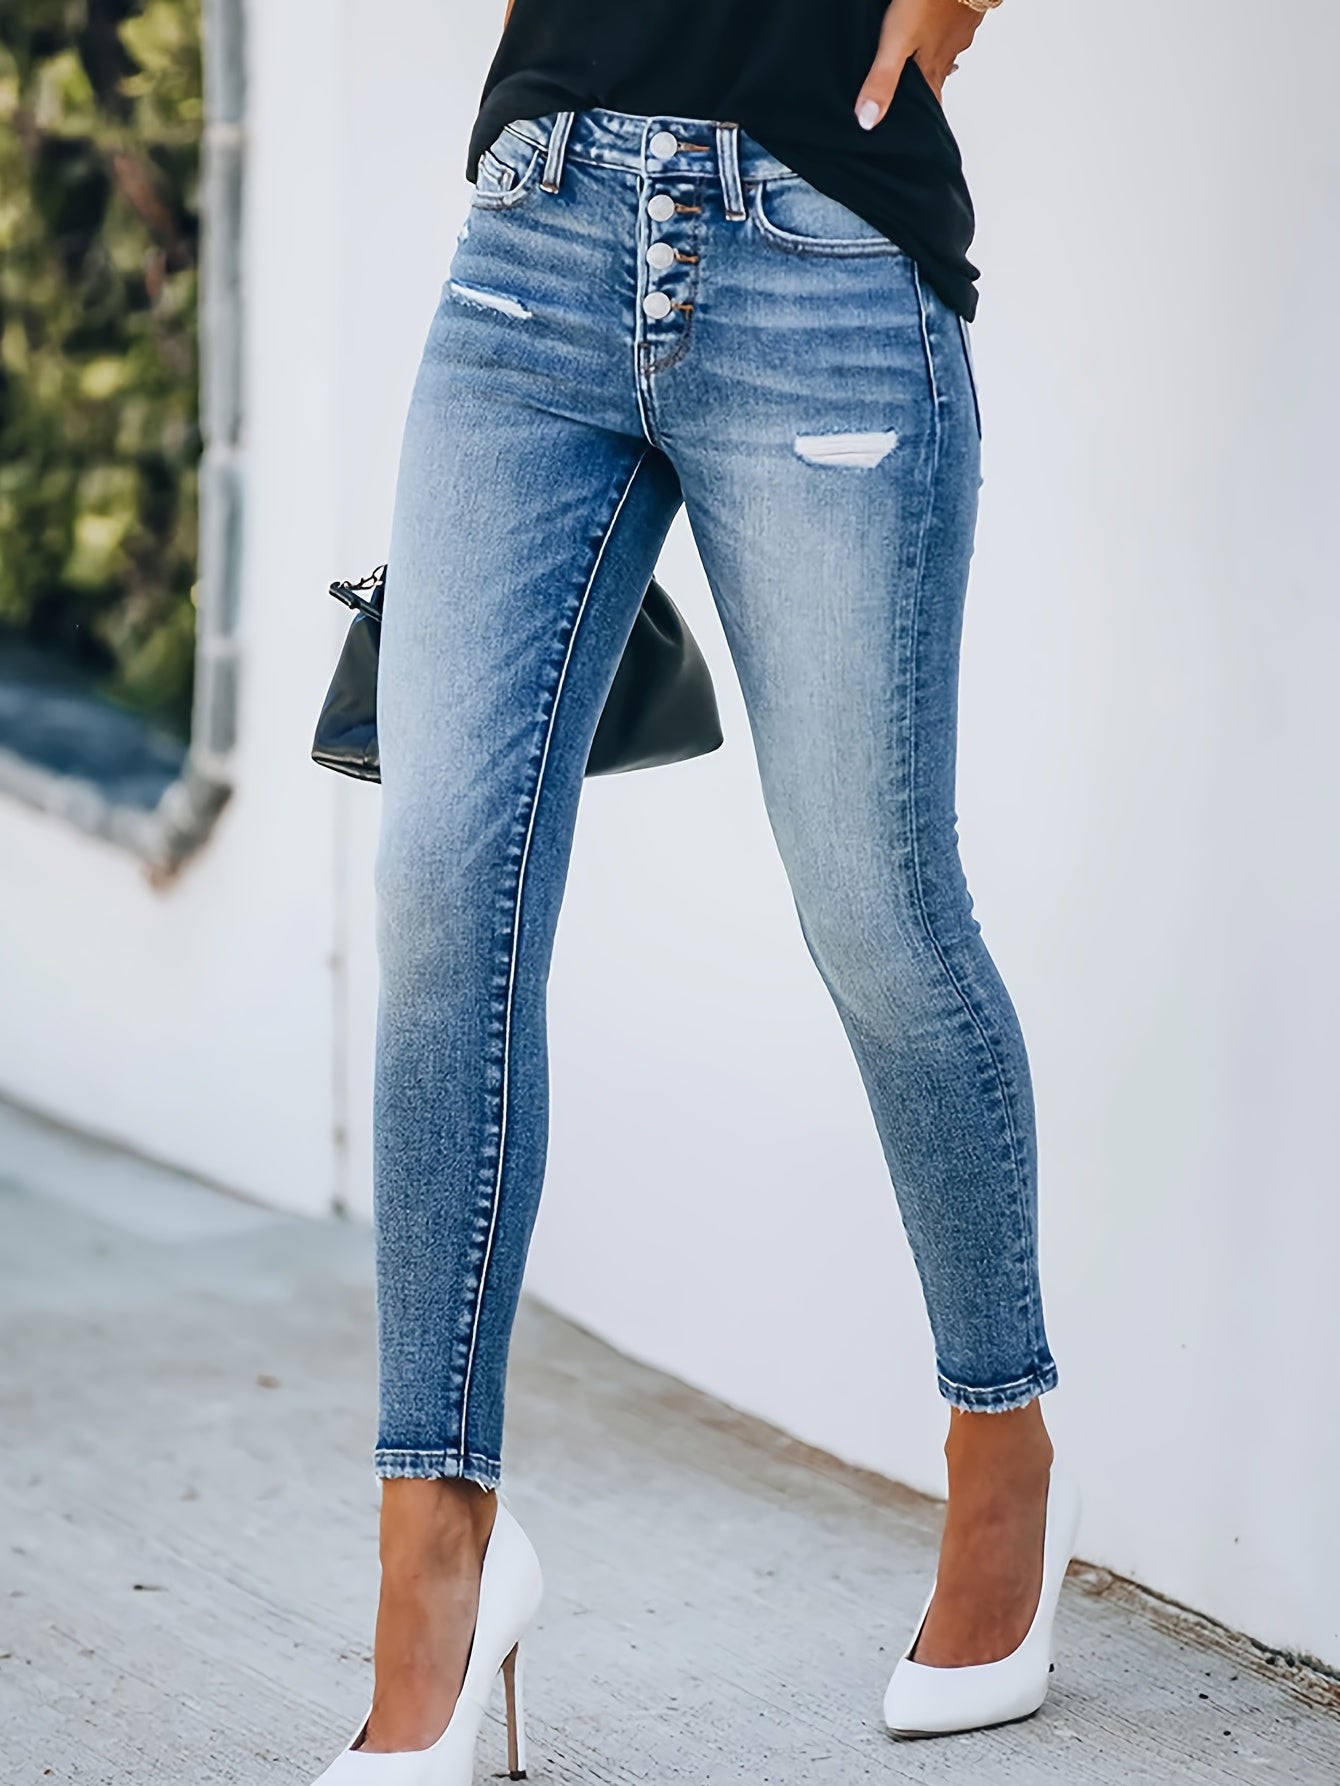 「lovevop」Single Breasted Closure Water Ripple Embossed Crotch Slight Stretchy Super Skinny Cropped Jeans, Women's Denim Jeans, Women's Clothing